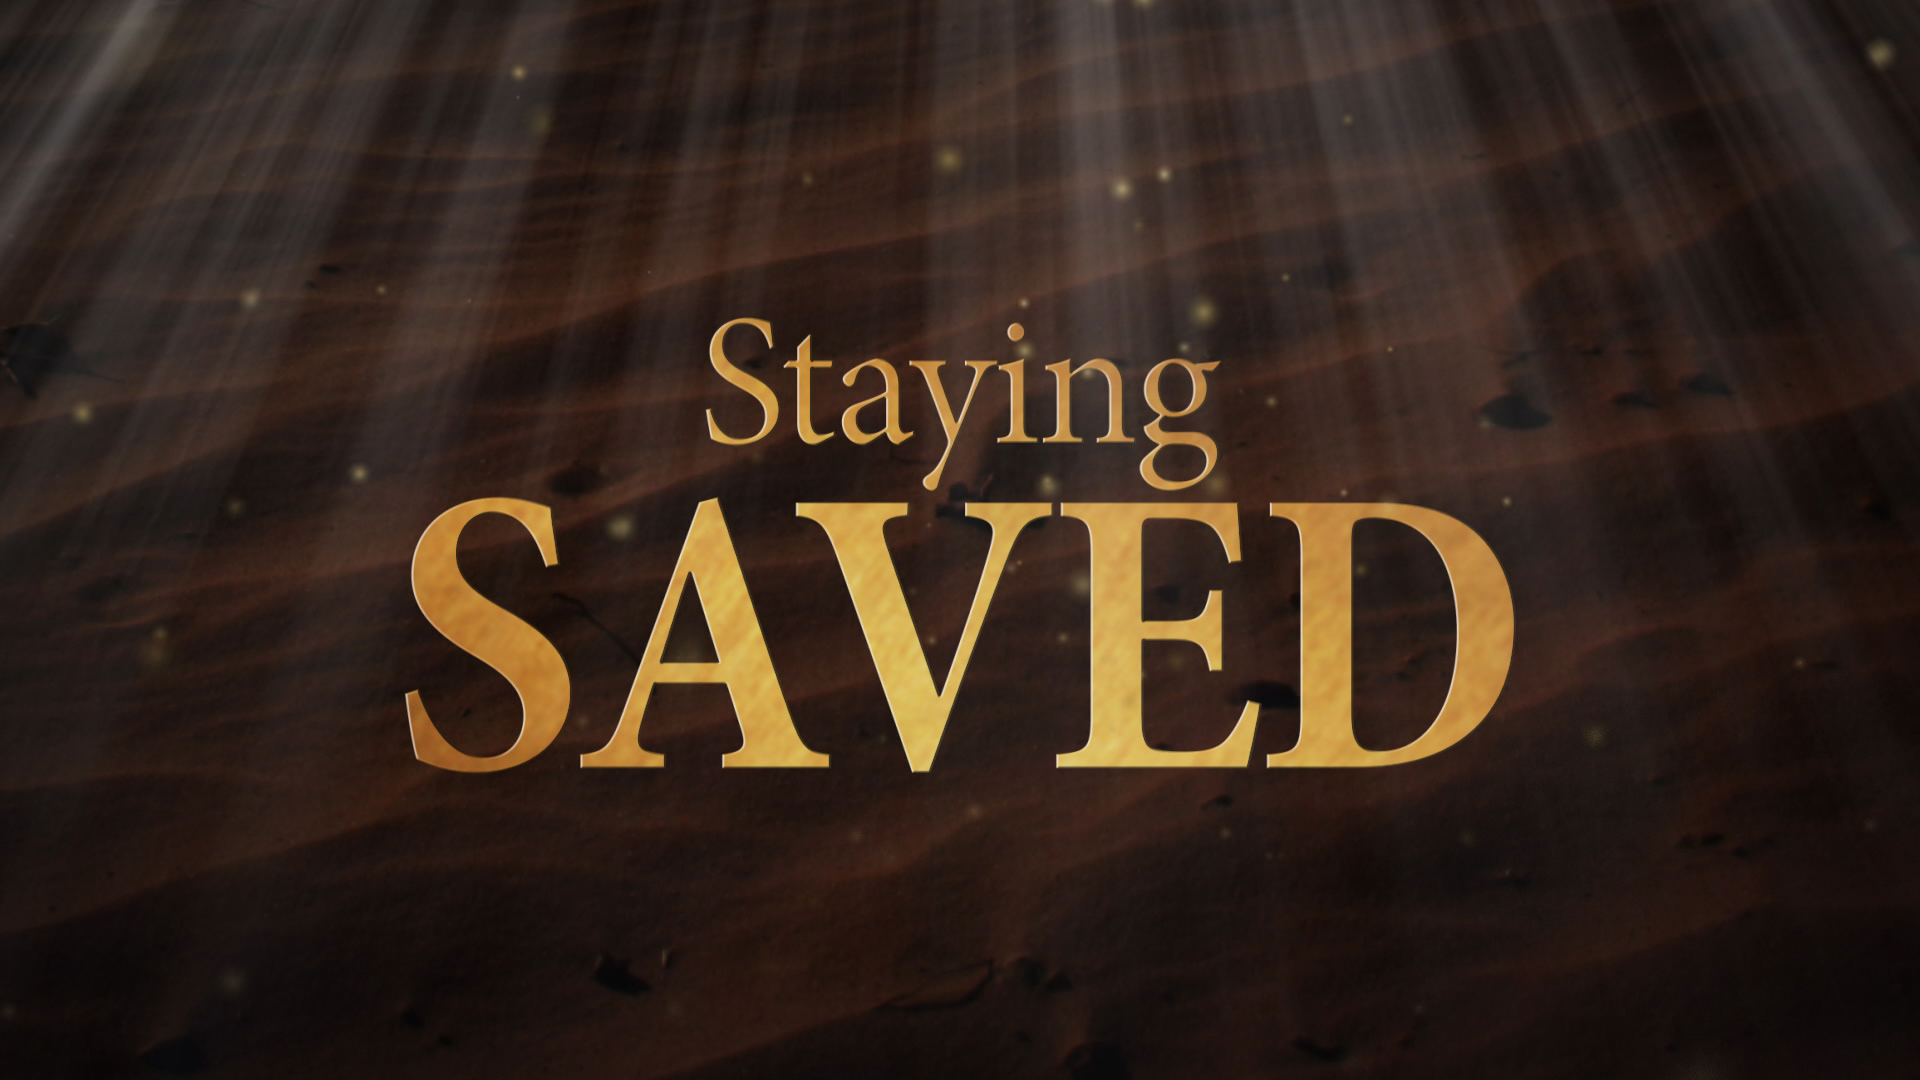 The Truth About Staying Saved